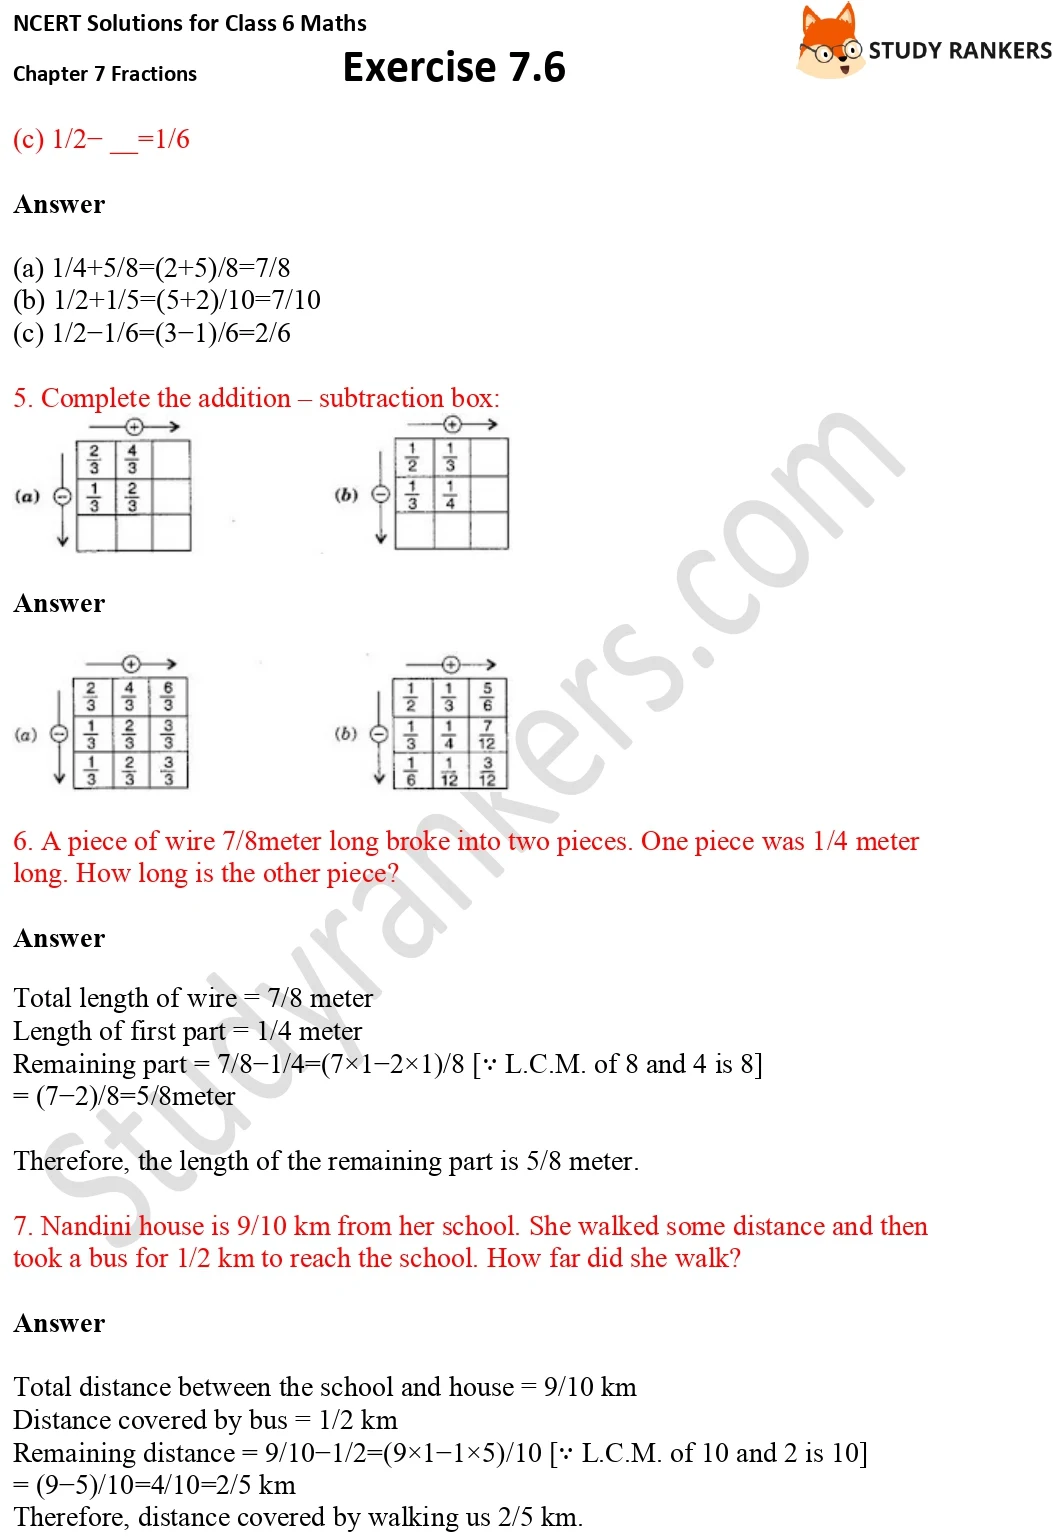 NCERT Solutions for Class 6 Maths Chapter 7 Fractions Exercise 7.6 Part 3